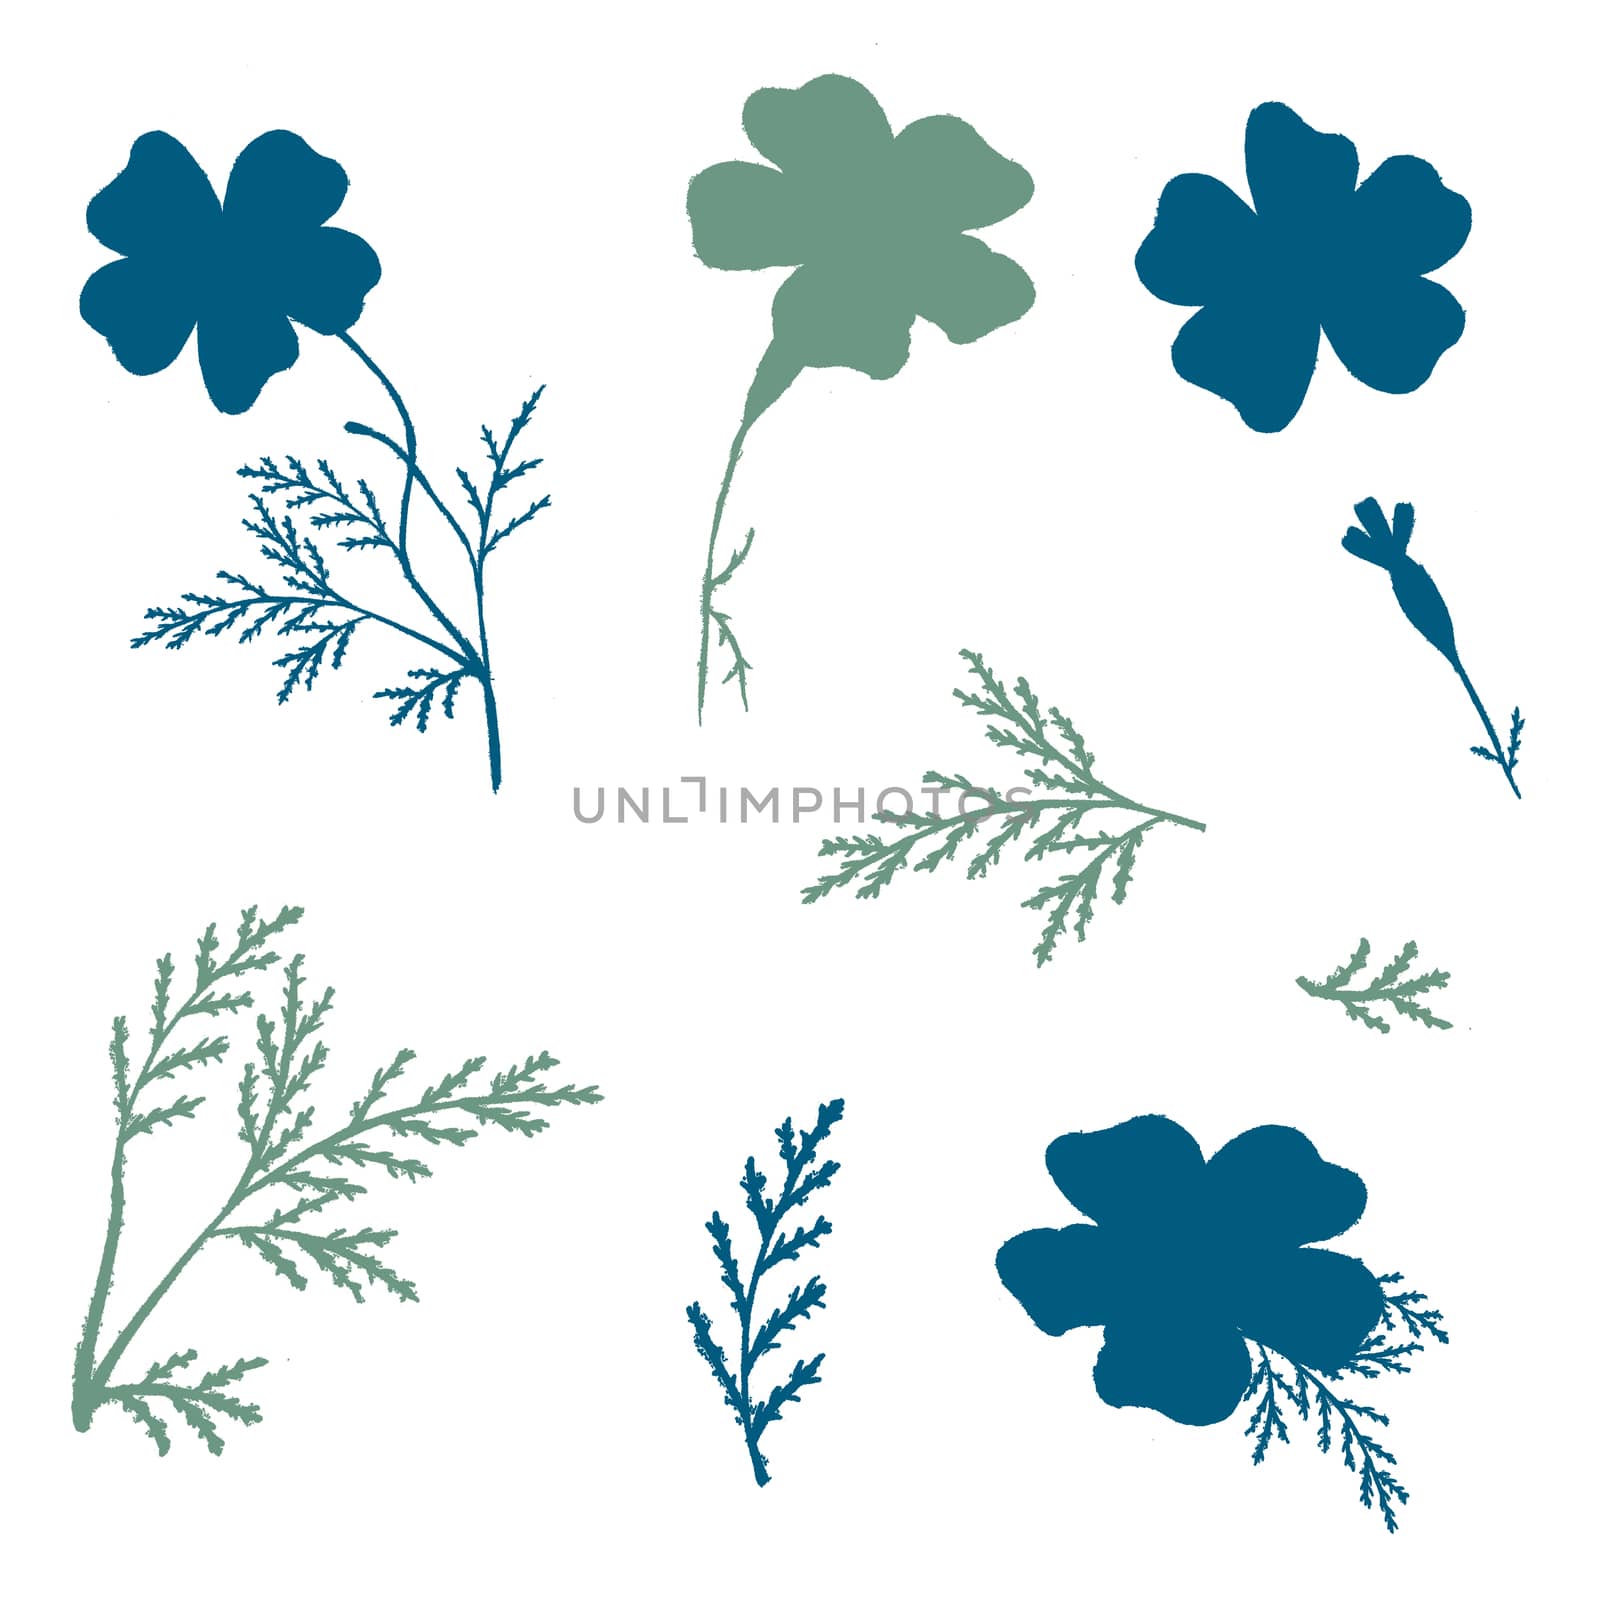 Set of Green and Blue Hand-Drawn Isolated Flower. Monochrome Botanical Plant Illustration. Thin-leaved Marigolds Silhouettes for Print, Tattoo, Design, Holiday, Wedding and Birthday Card.